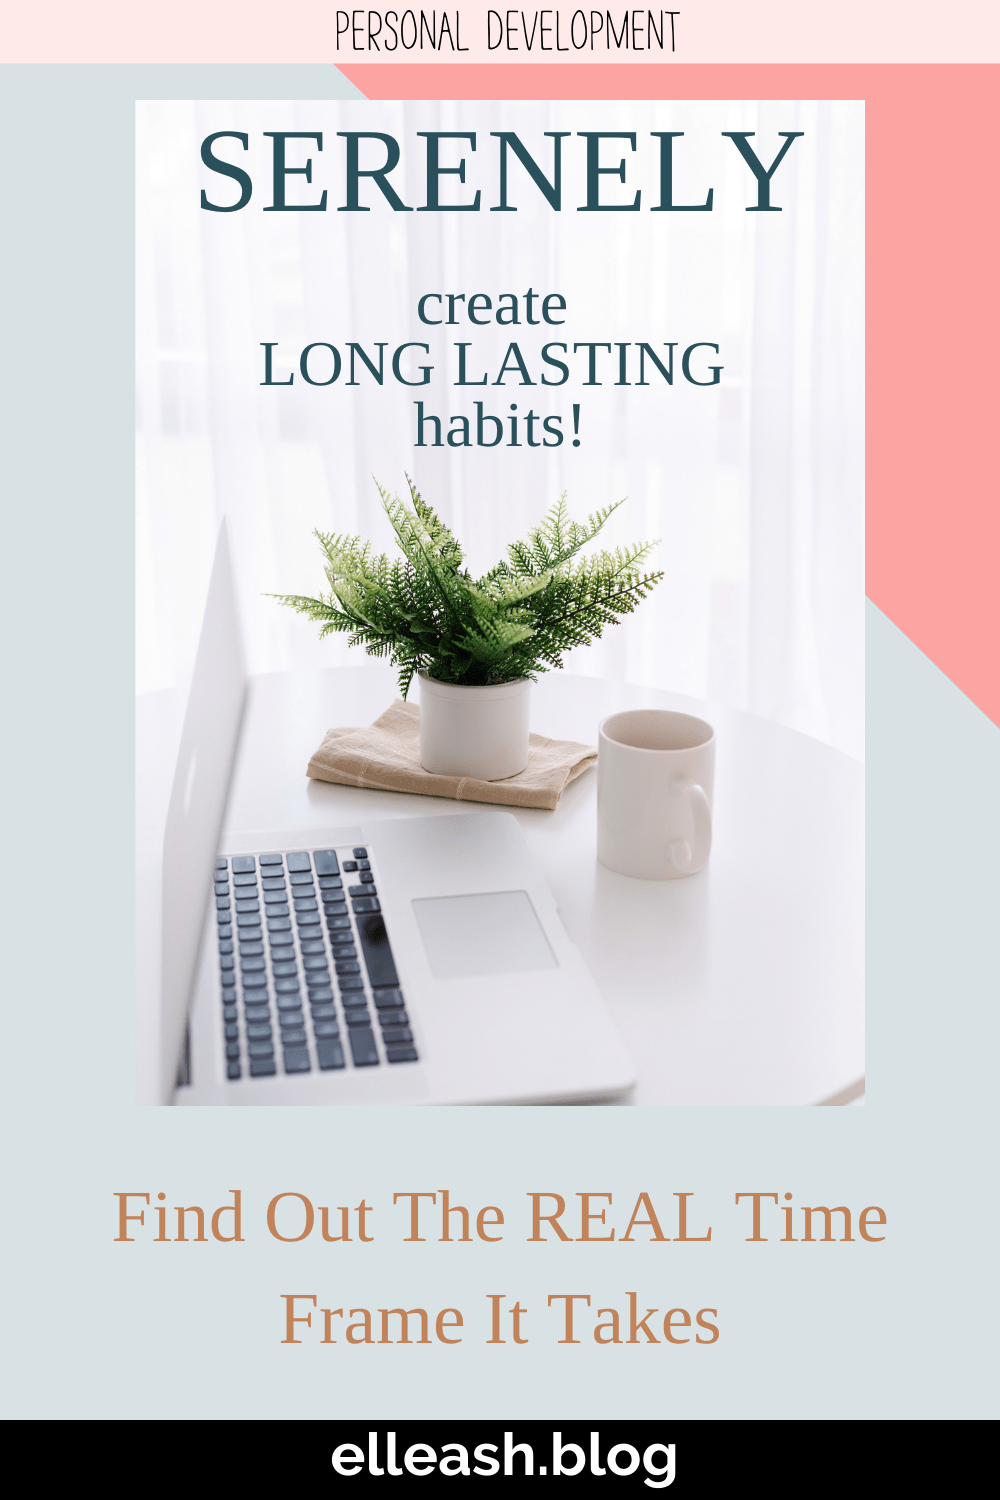 5.How To Build New Habits & How Long Does It Take